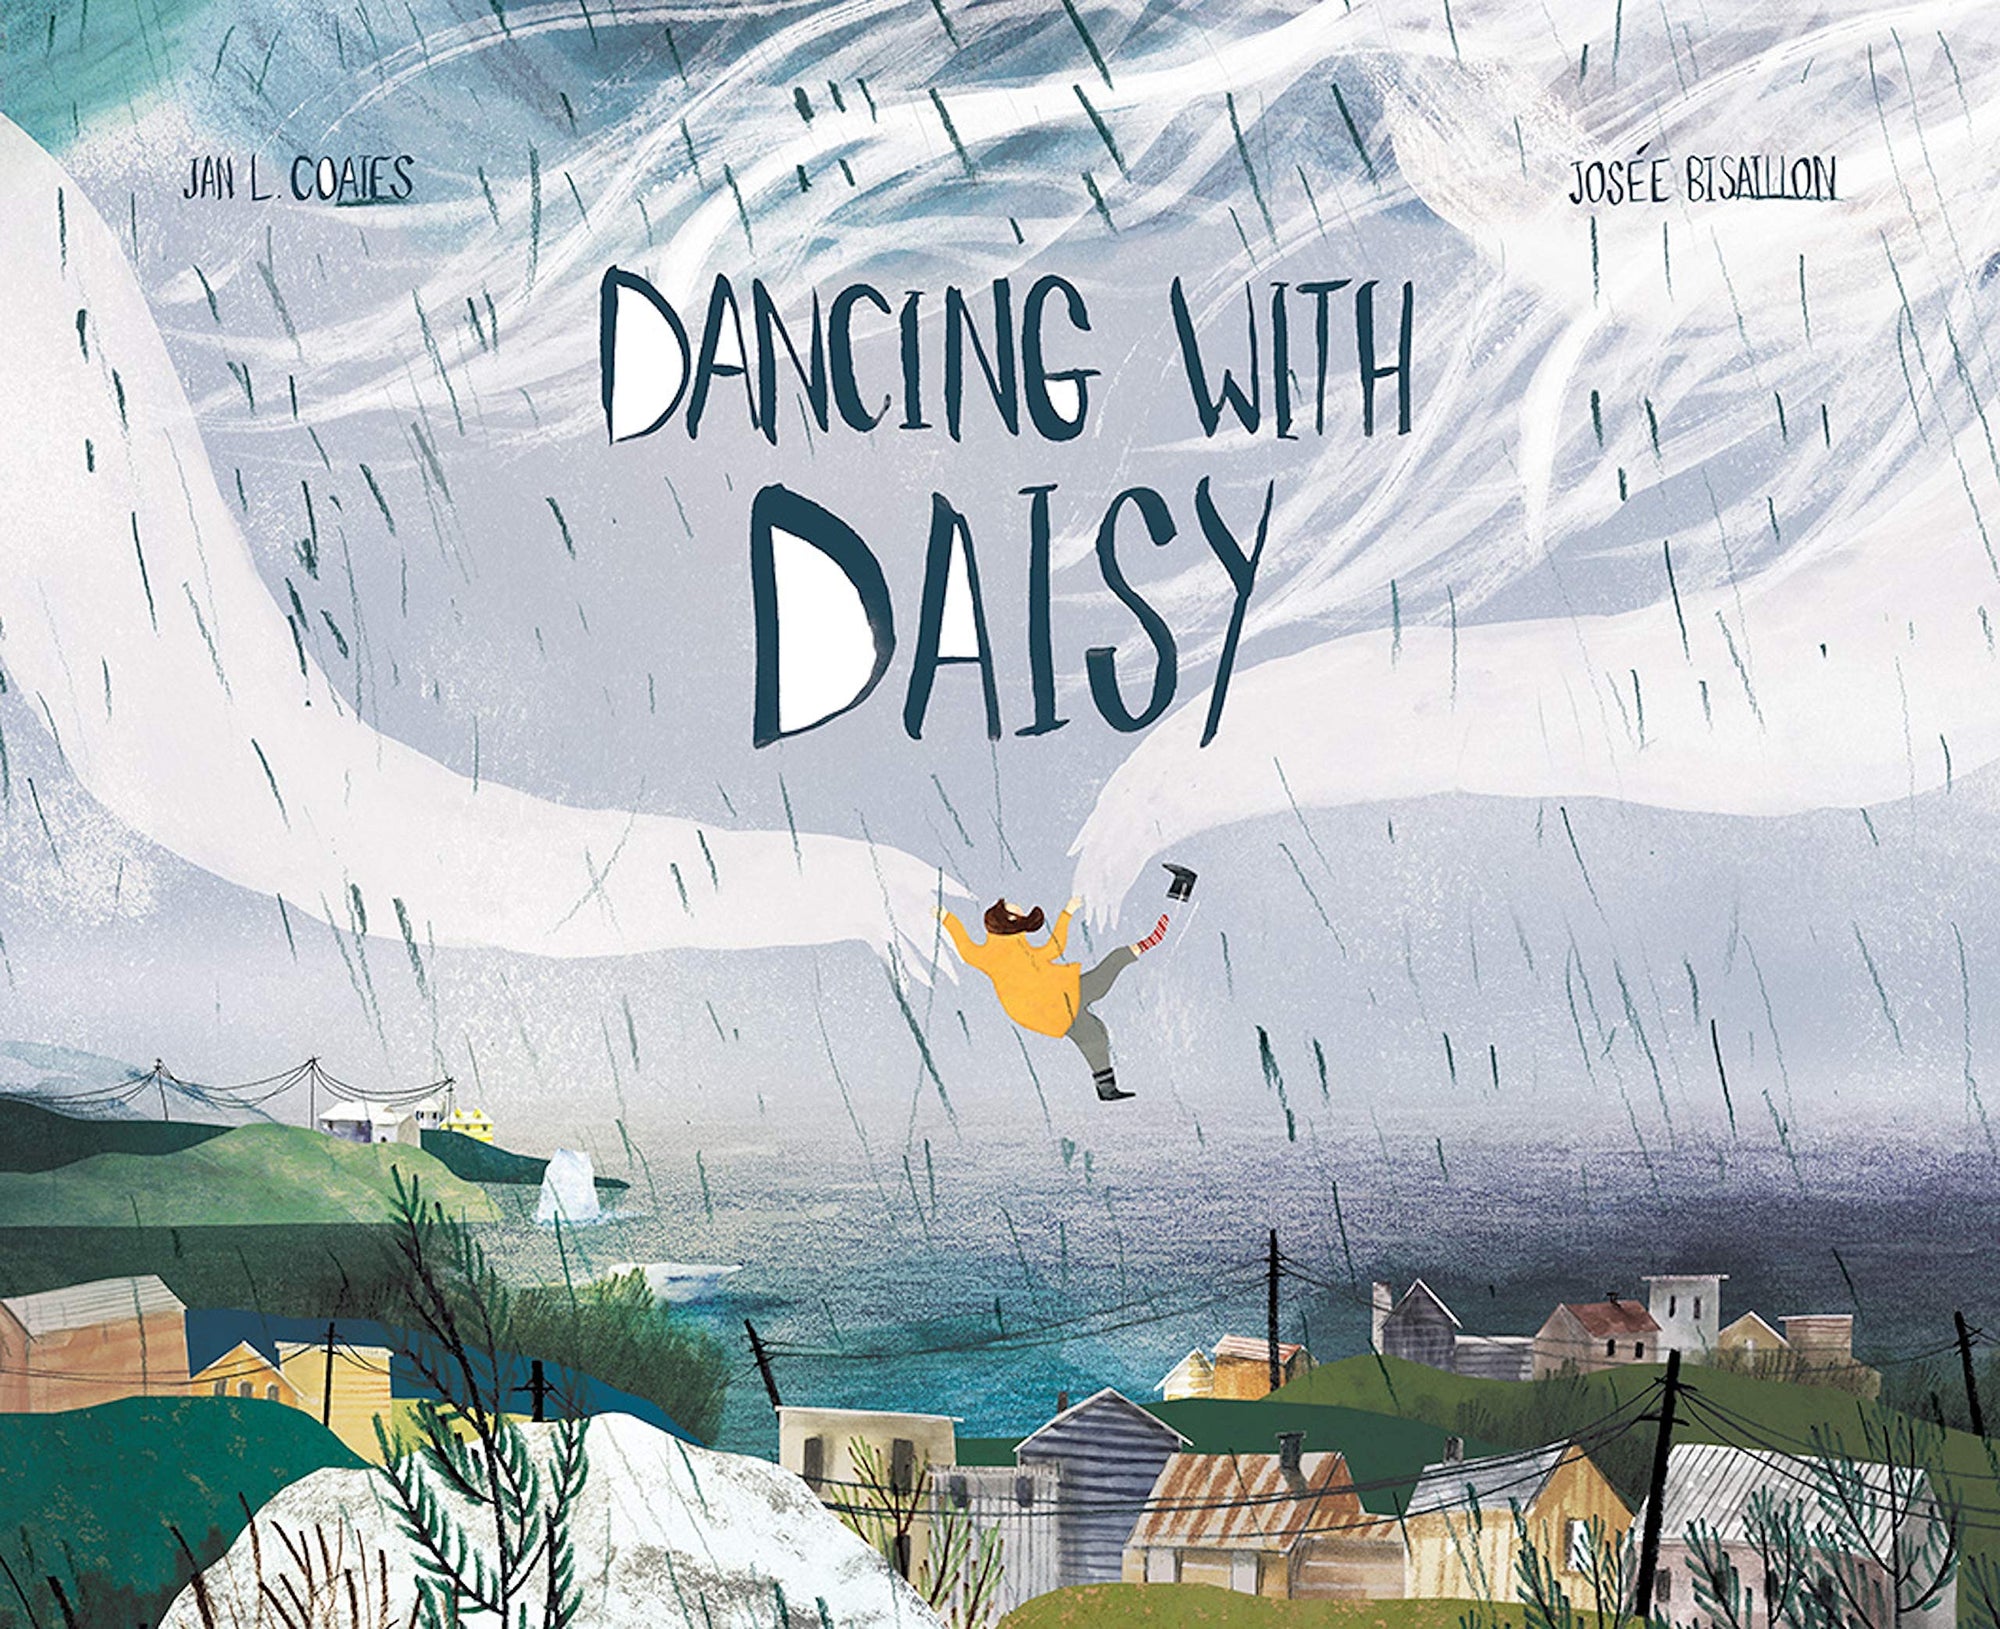 Dancing With Daisy